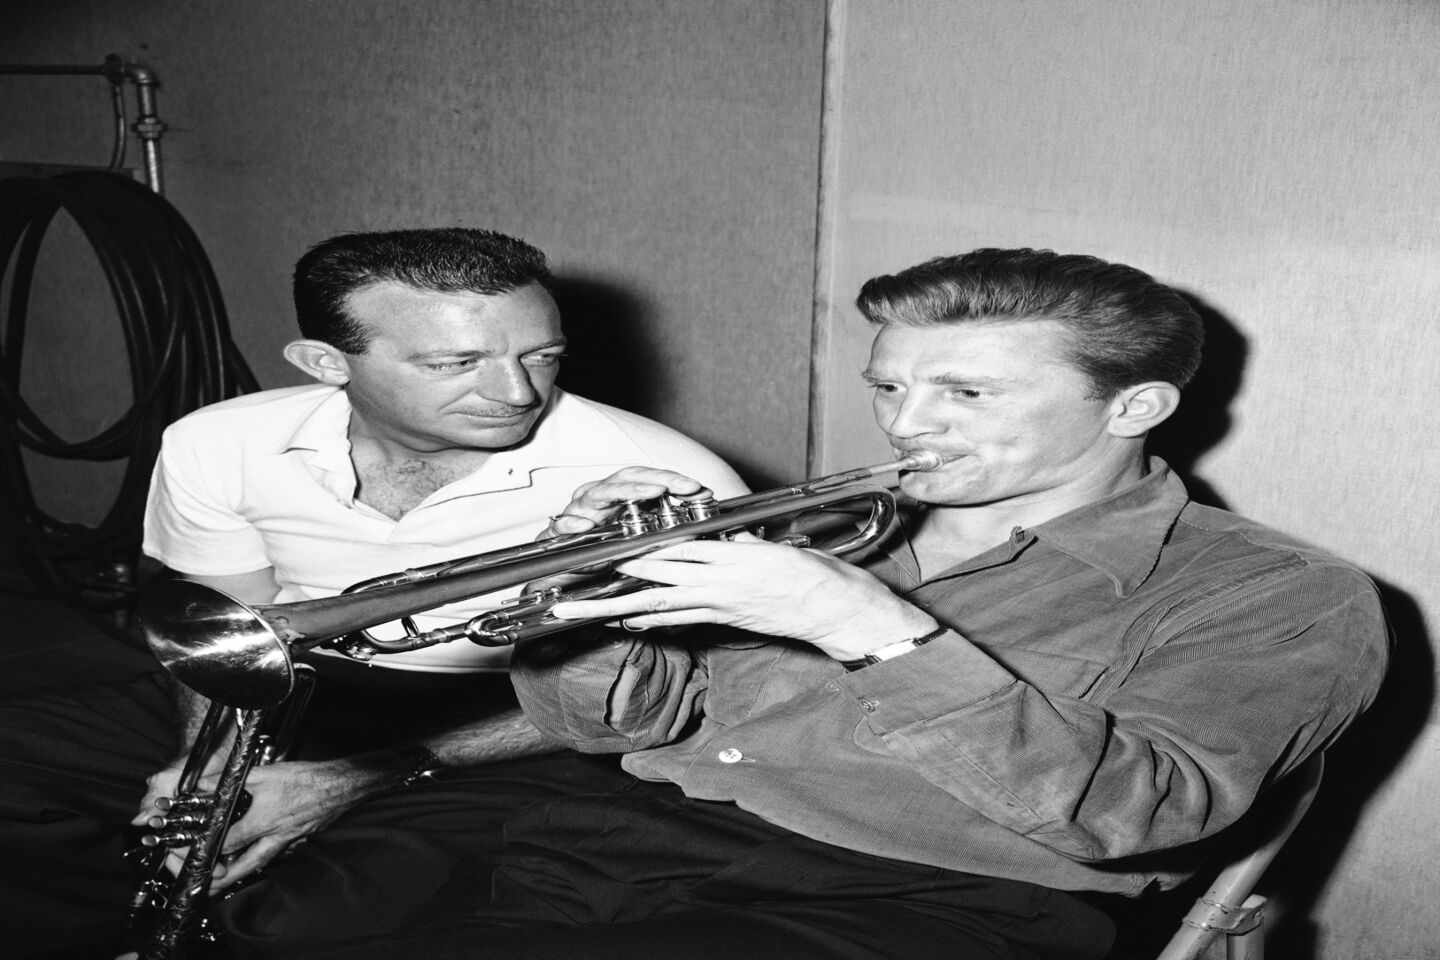 Famous trumpeter Harry James, left, shows Douglas how to play for the movie cameras. The toot-tutoring is in preparation for Douglas' role as a great trumpet player in the 1950 film "Young Man With a Horn."